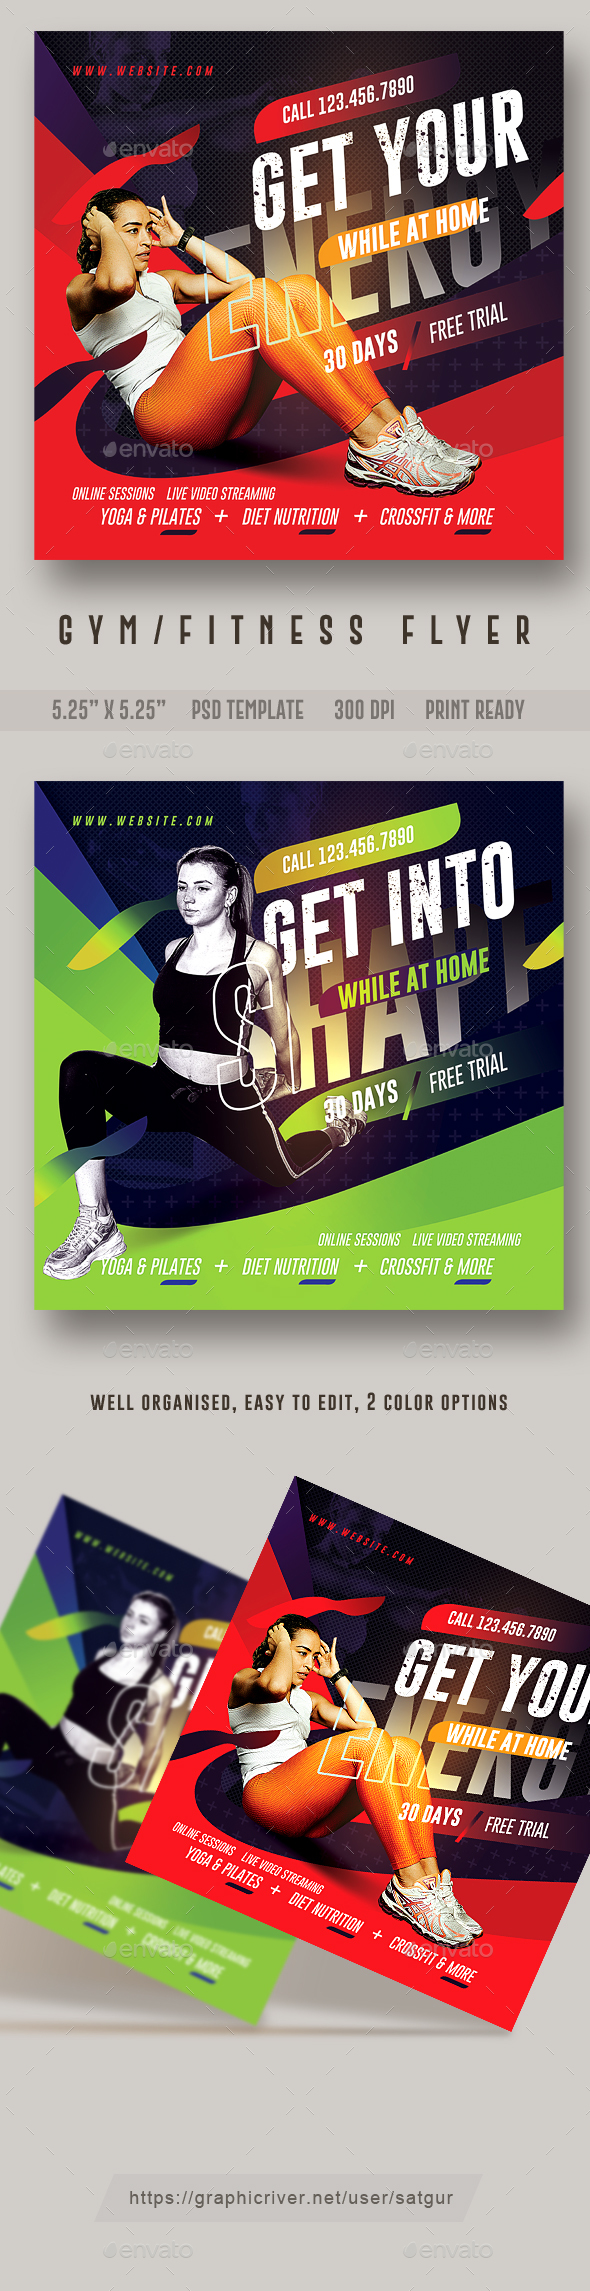 Gym Flyer / Fitness Flyer Template for online classes